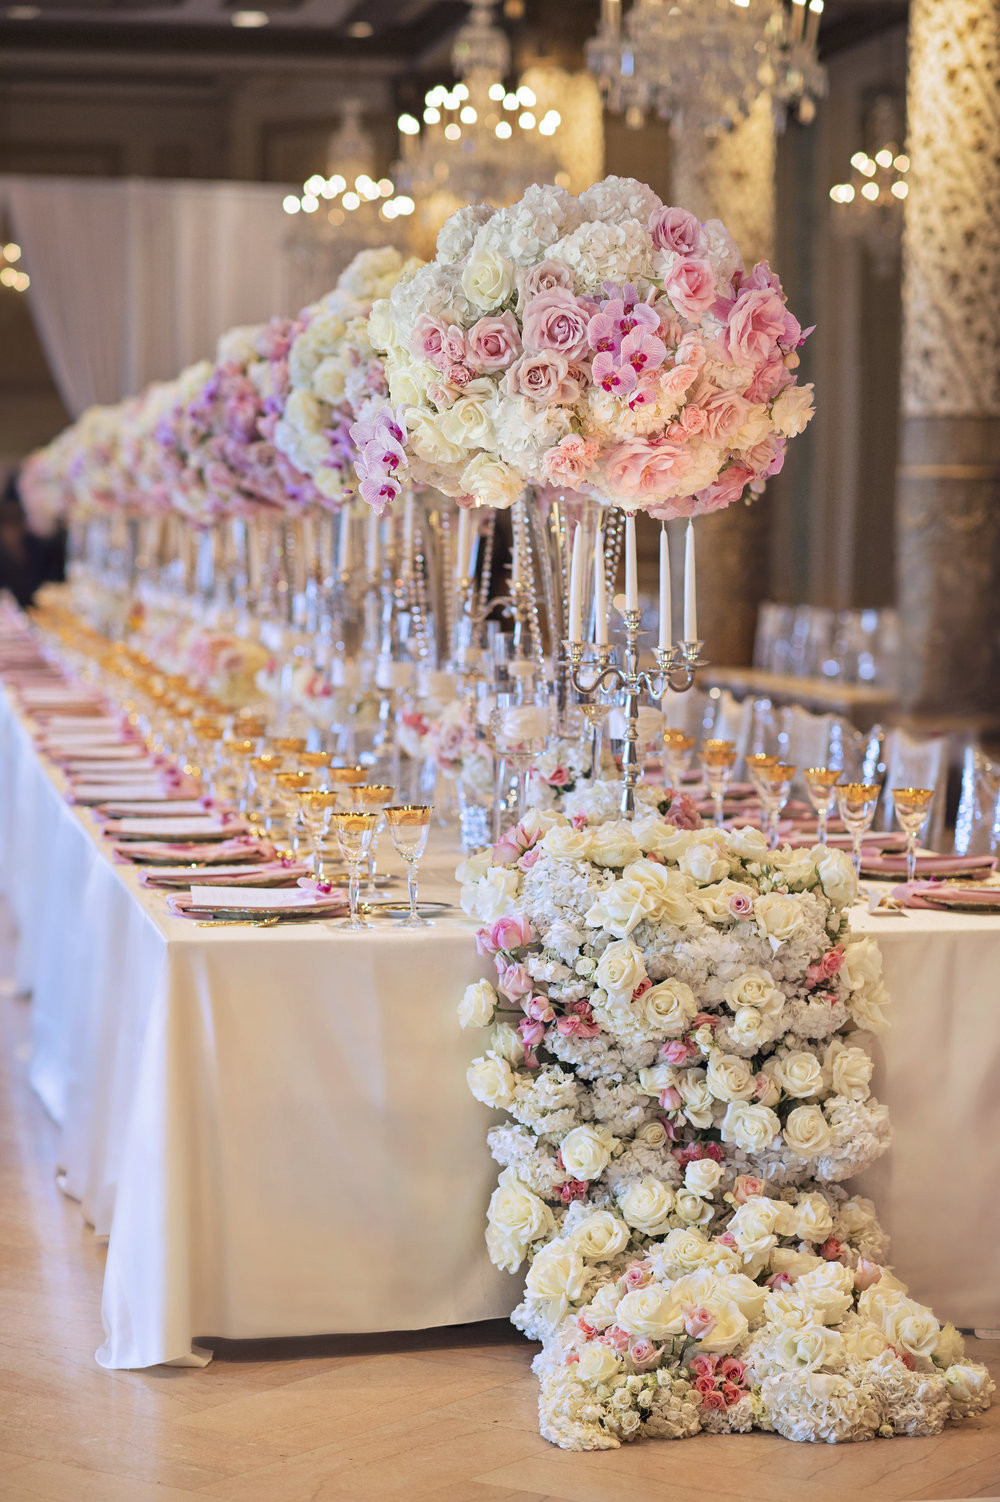 How To Decorate A Wedding Table
 Wedding Ideas Long Reception Tables Belle The Magazine